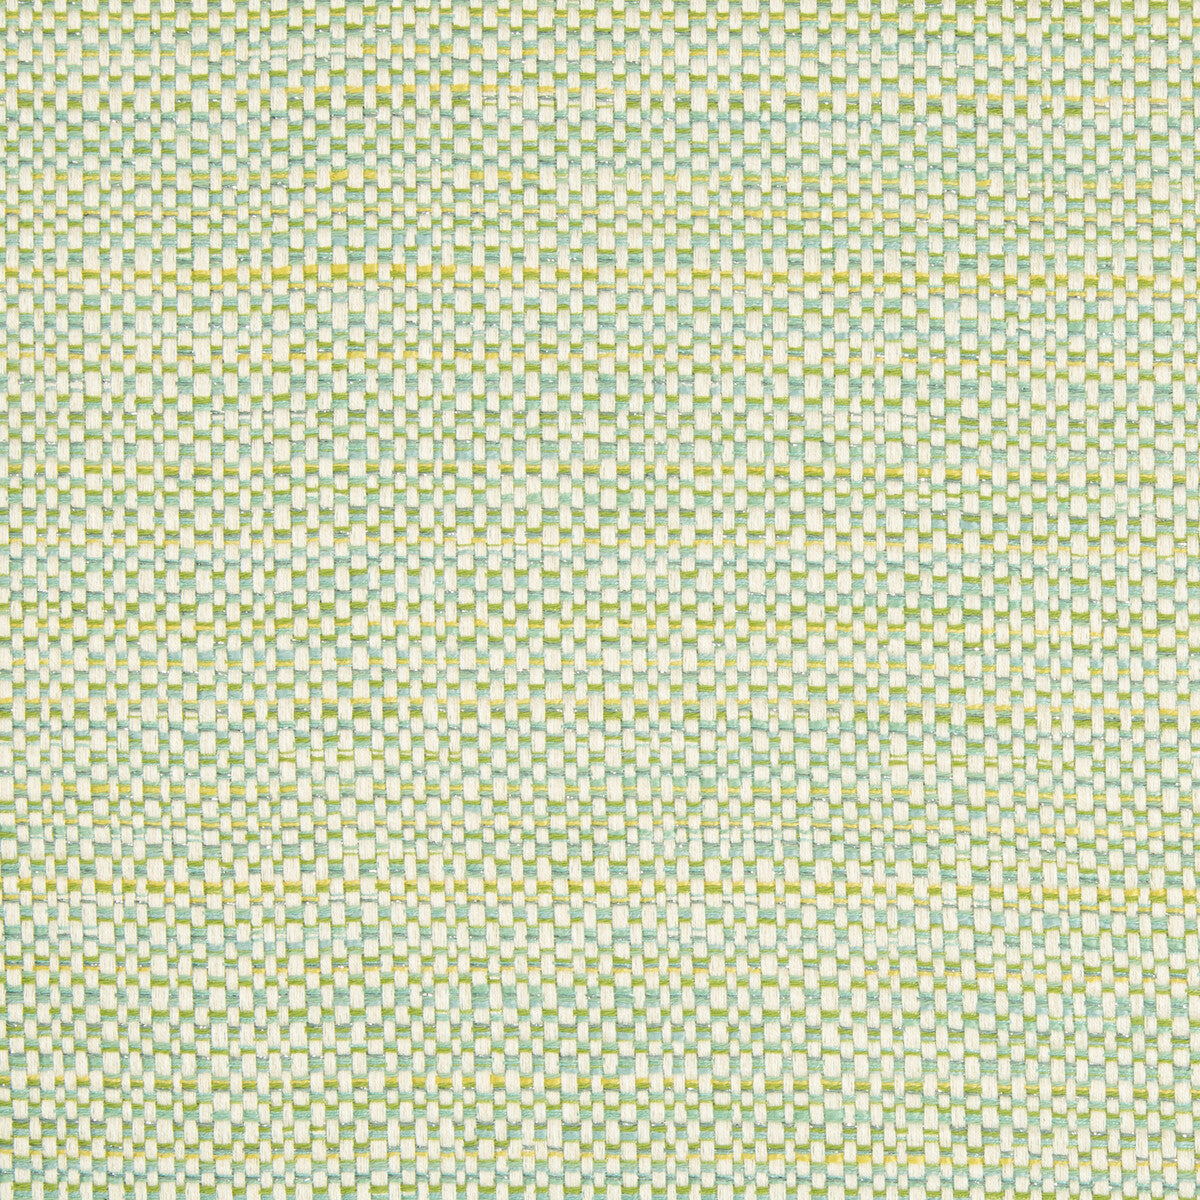 Kravet Design fabric in 34683-13 color - pattern 34683.13.0 - by Kravet Design in the Crypton Home collection